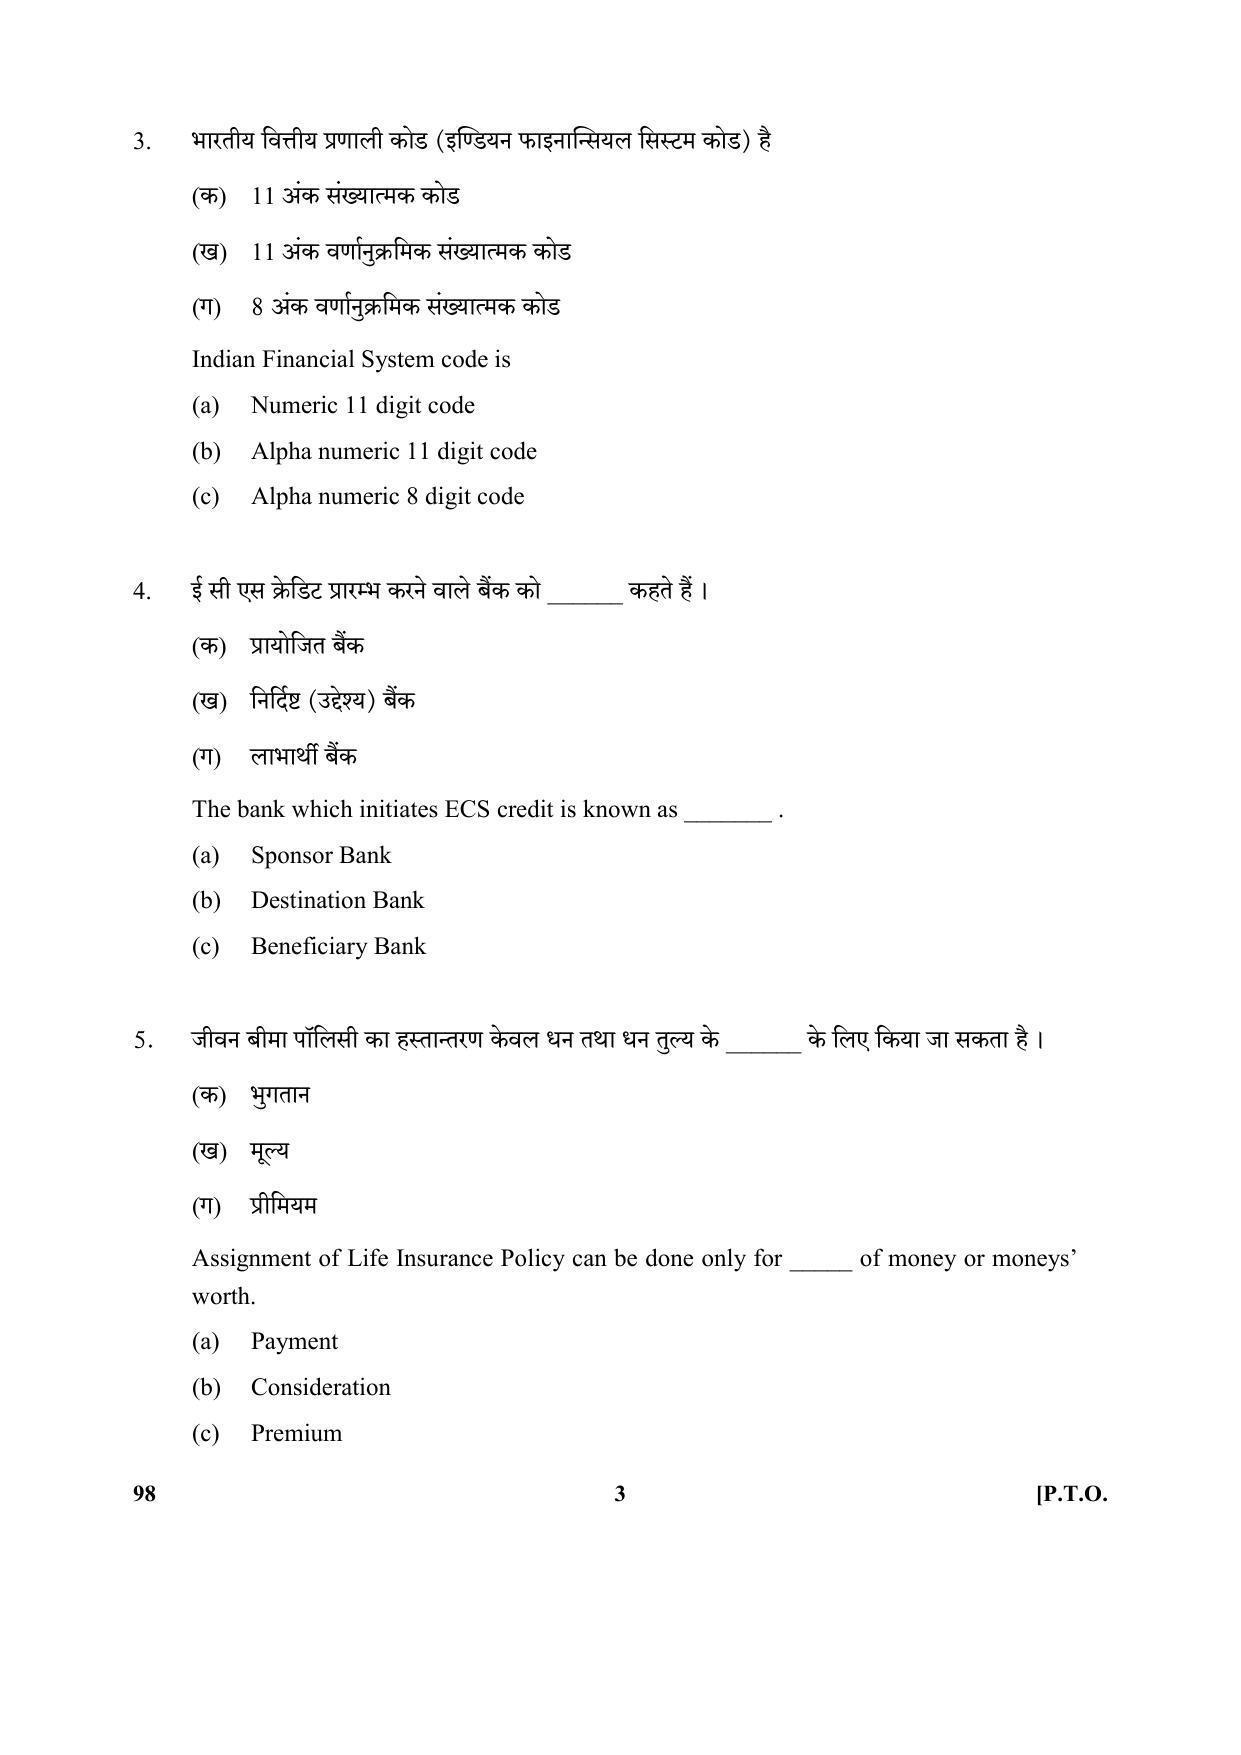 CBSE Class 10 98 (Banking & Insurance) 2018 Question Paper - Page 3